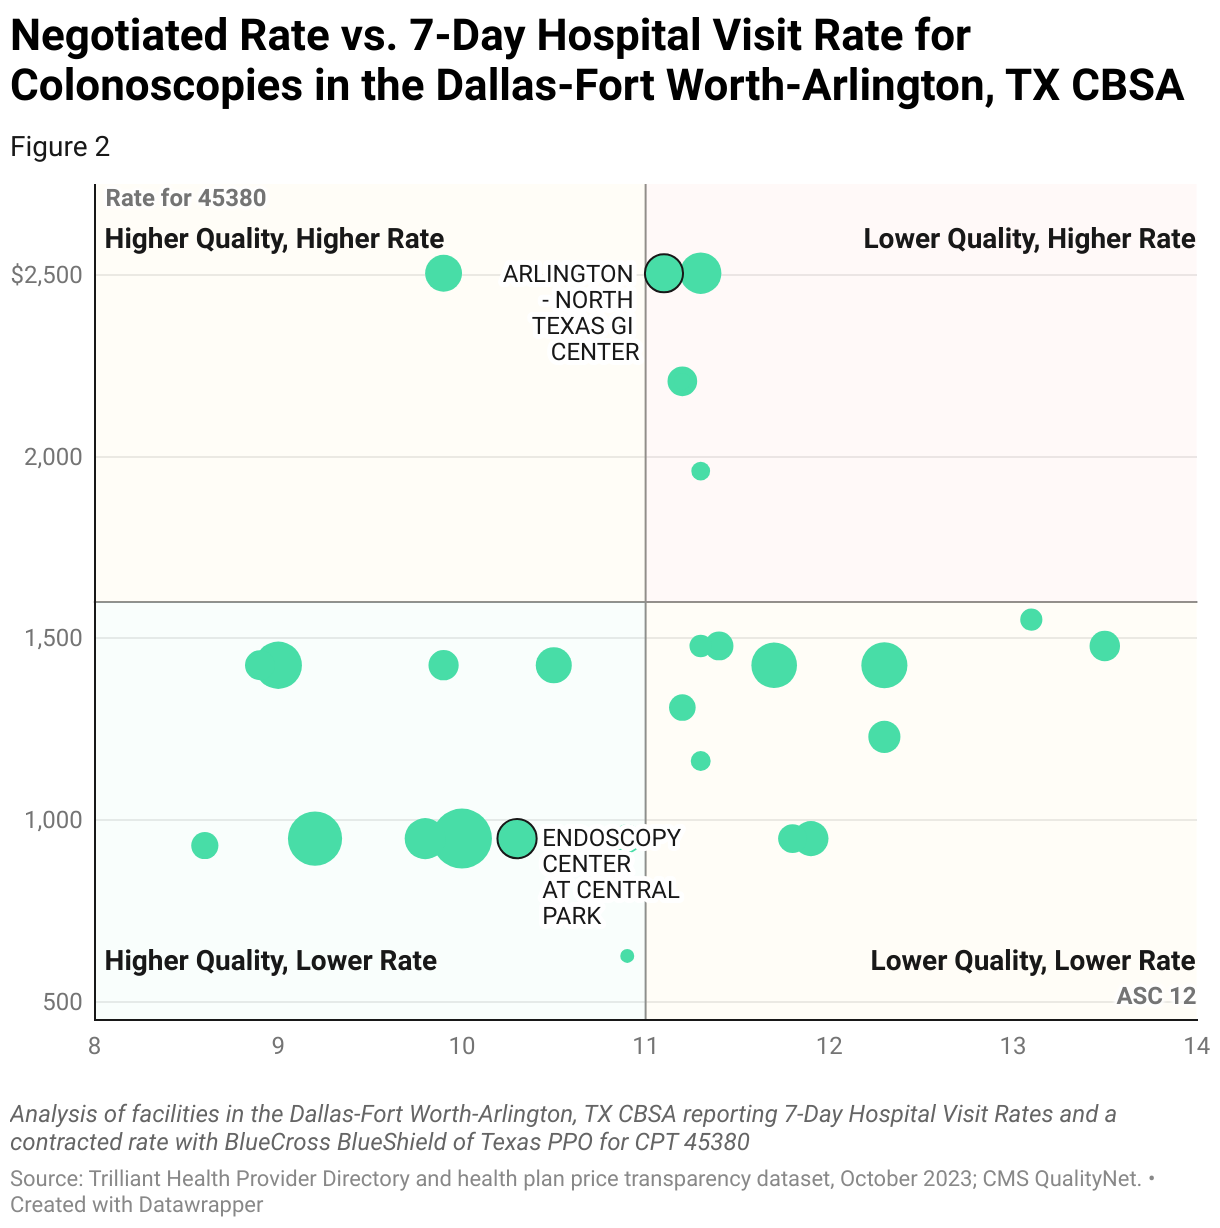 Chart comparing BlueCross BlueShield of Texas PPO in-network negotiated rates with the risk-standardized hospital visit rate for colonoscopies for ASCs in the Dallas-Fort Worth-Arlington, TX CBSA